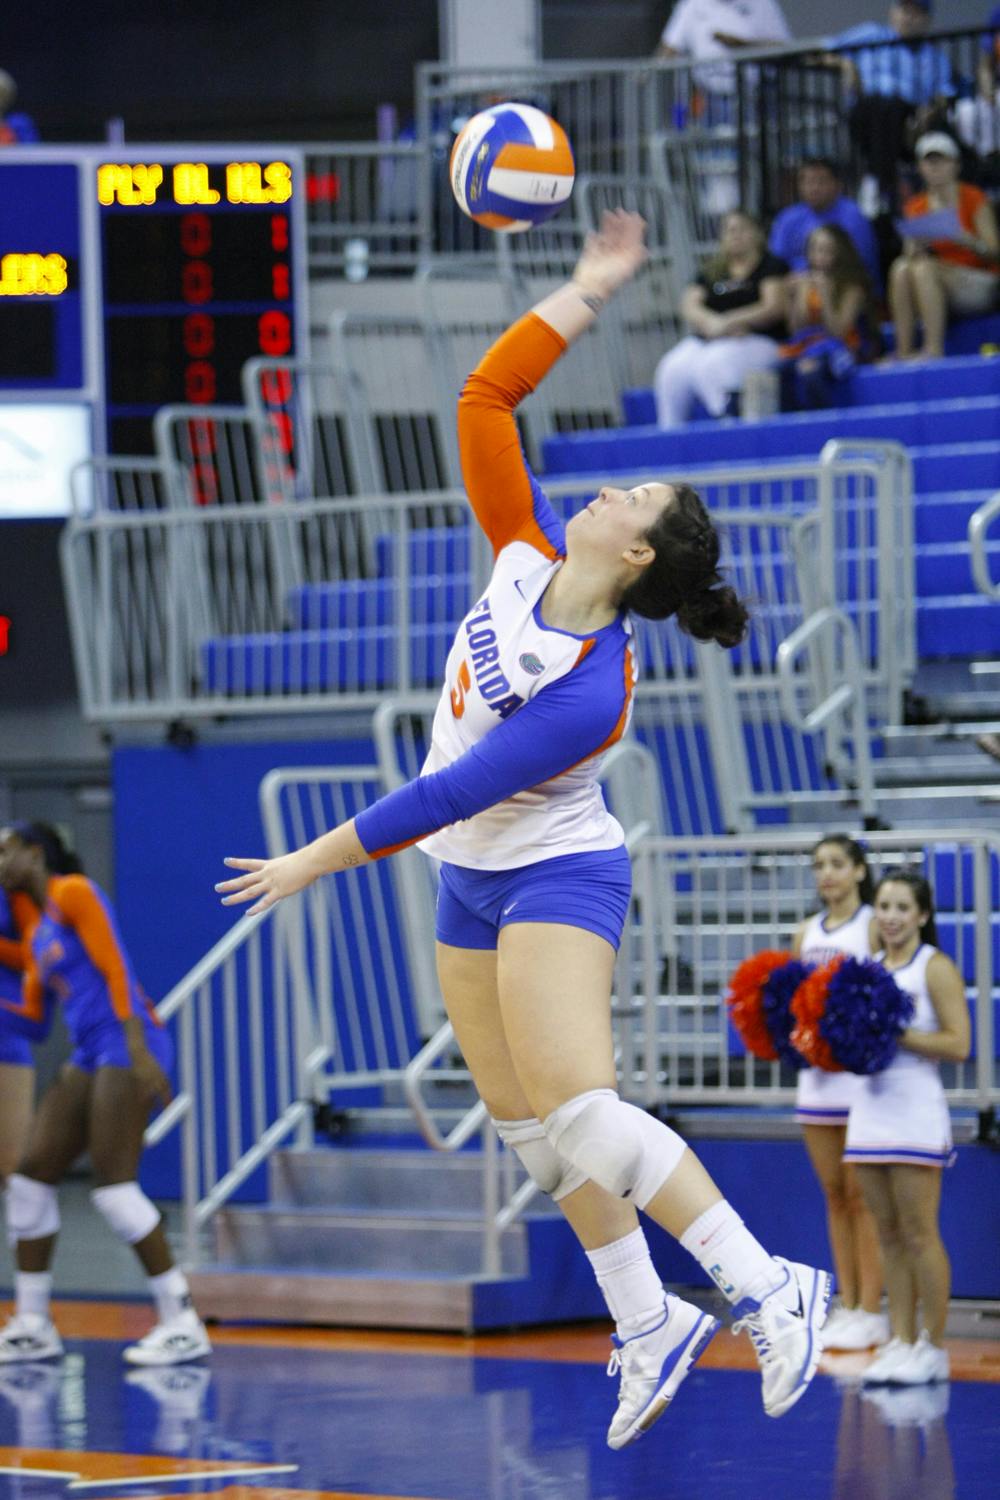 <p align="justify">Junior libero Taylor Unroe serves against Florida A&amp;M on Aug. 25, 2012, in the O’Connell Center. UF won the match 3-0.</p>